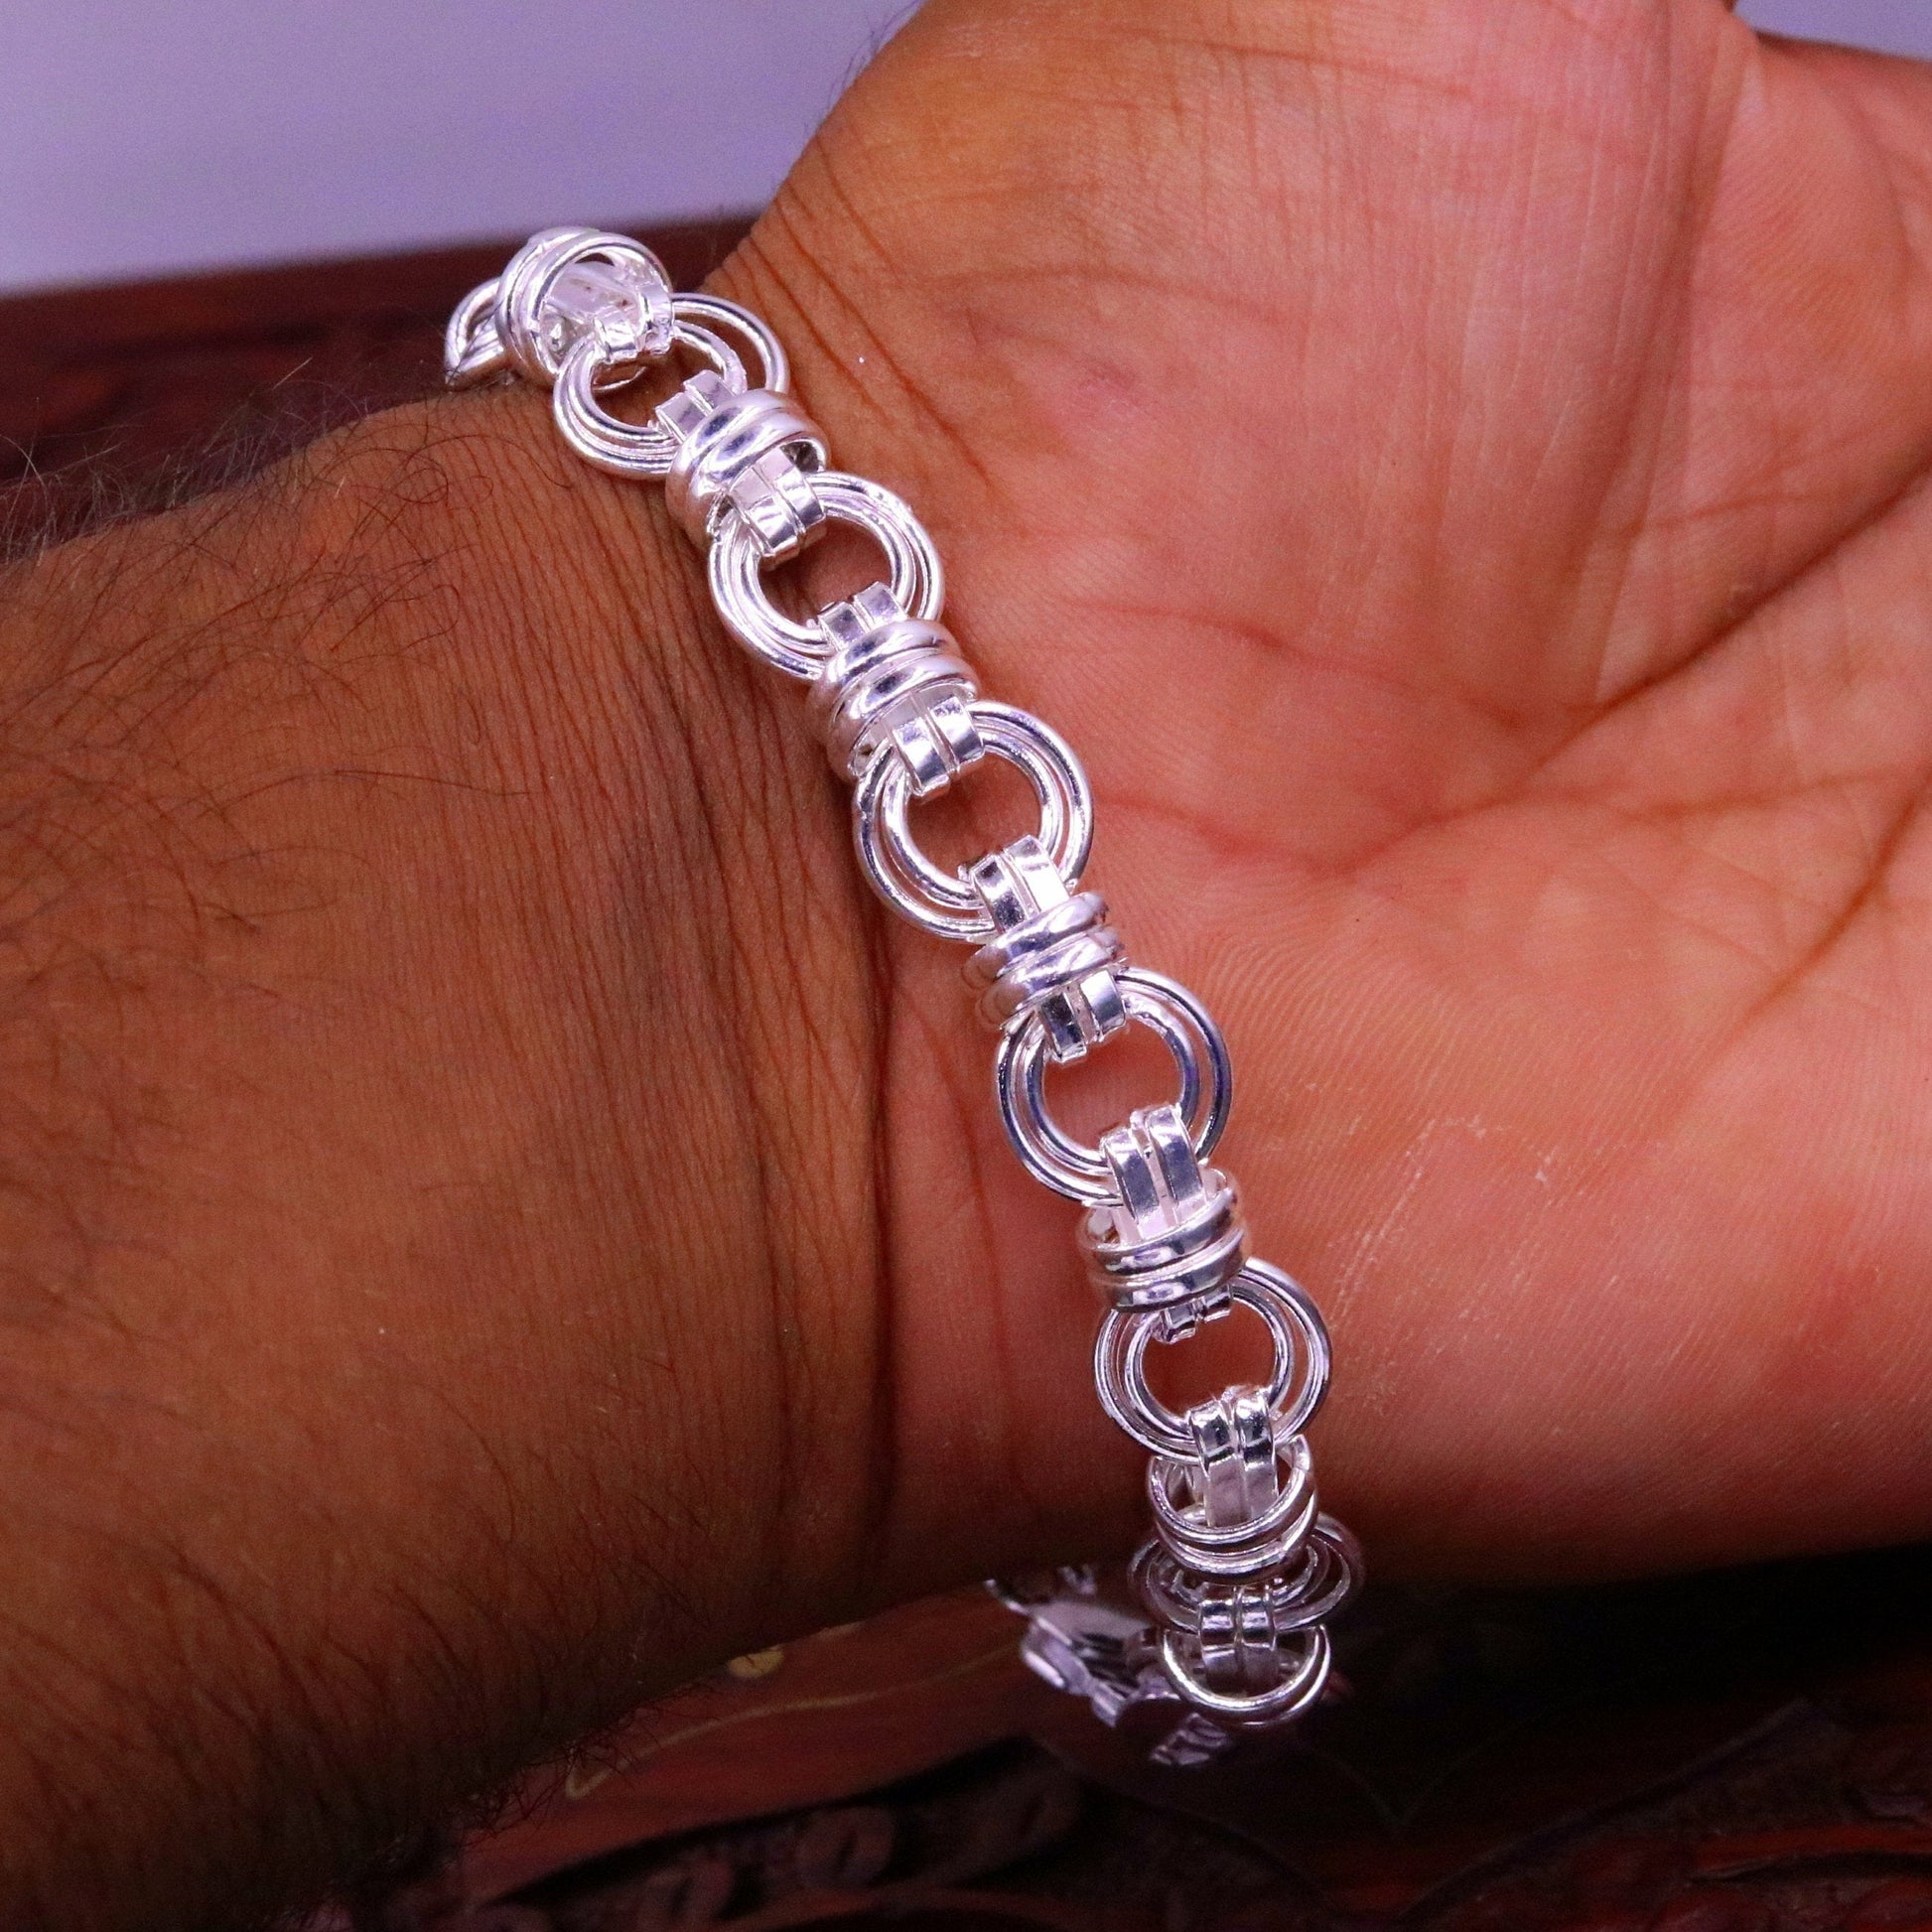 Excellent handmade Sterling silver bracelet modern stylish men's attractive bracelet jewelry pretty gifting jewelry india sbr106 - TRIBAL ORNAMENTS